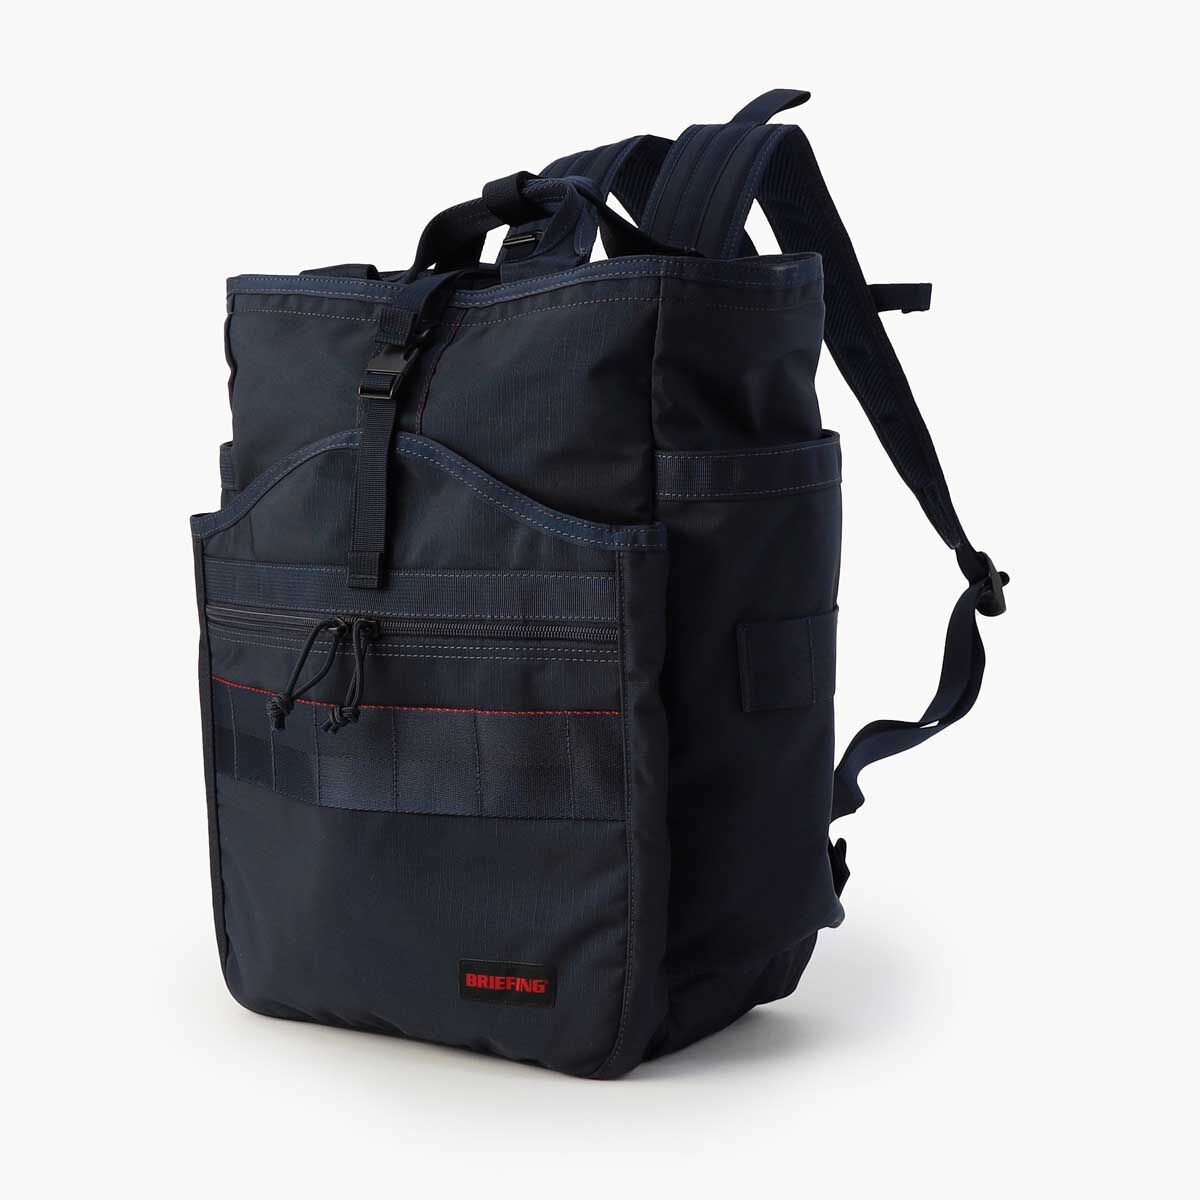 BRIEFING | Premium Bags and Luggage | Official Online Store